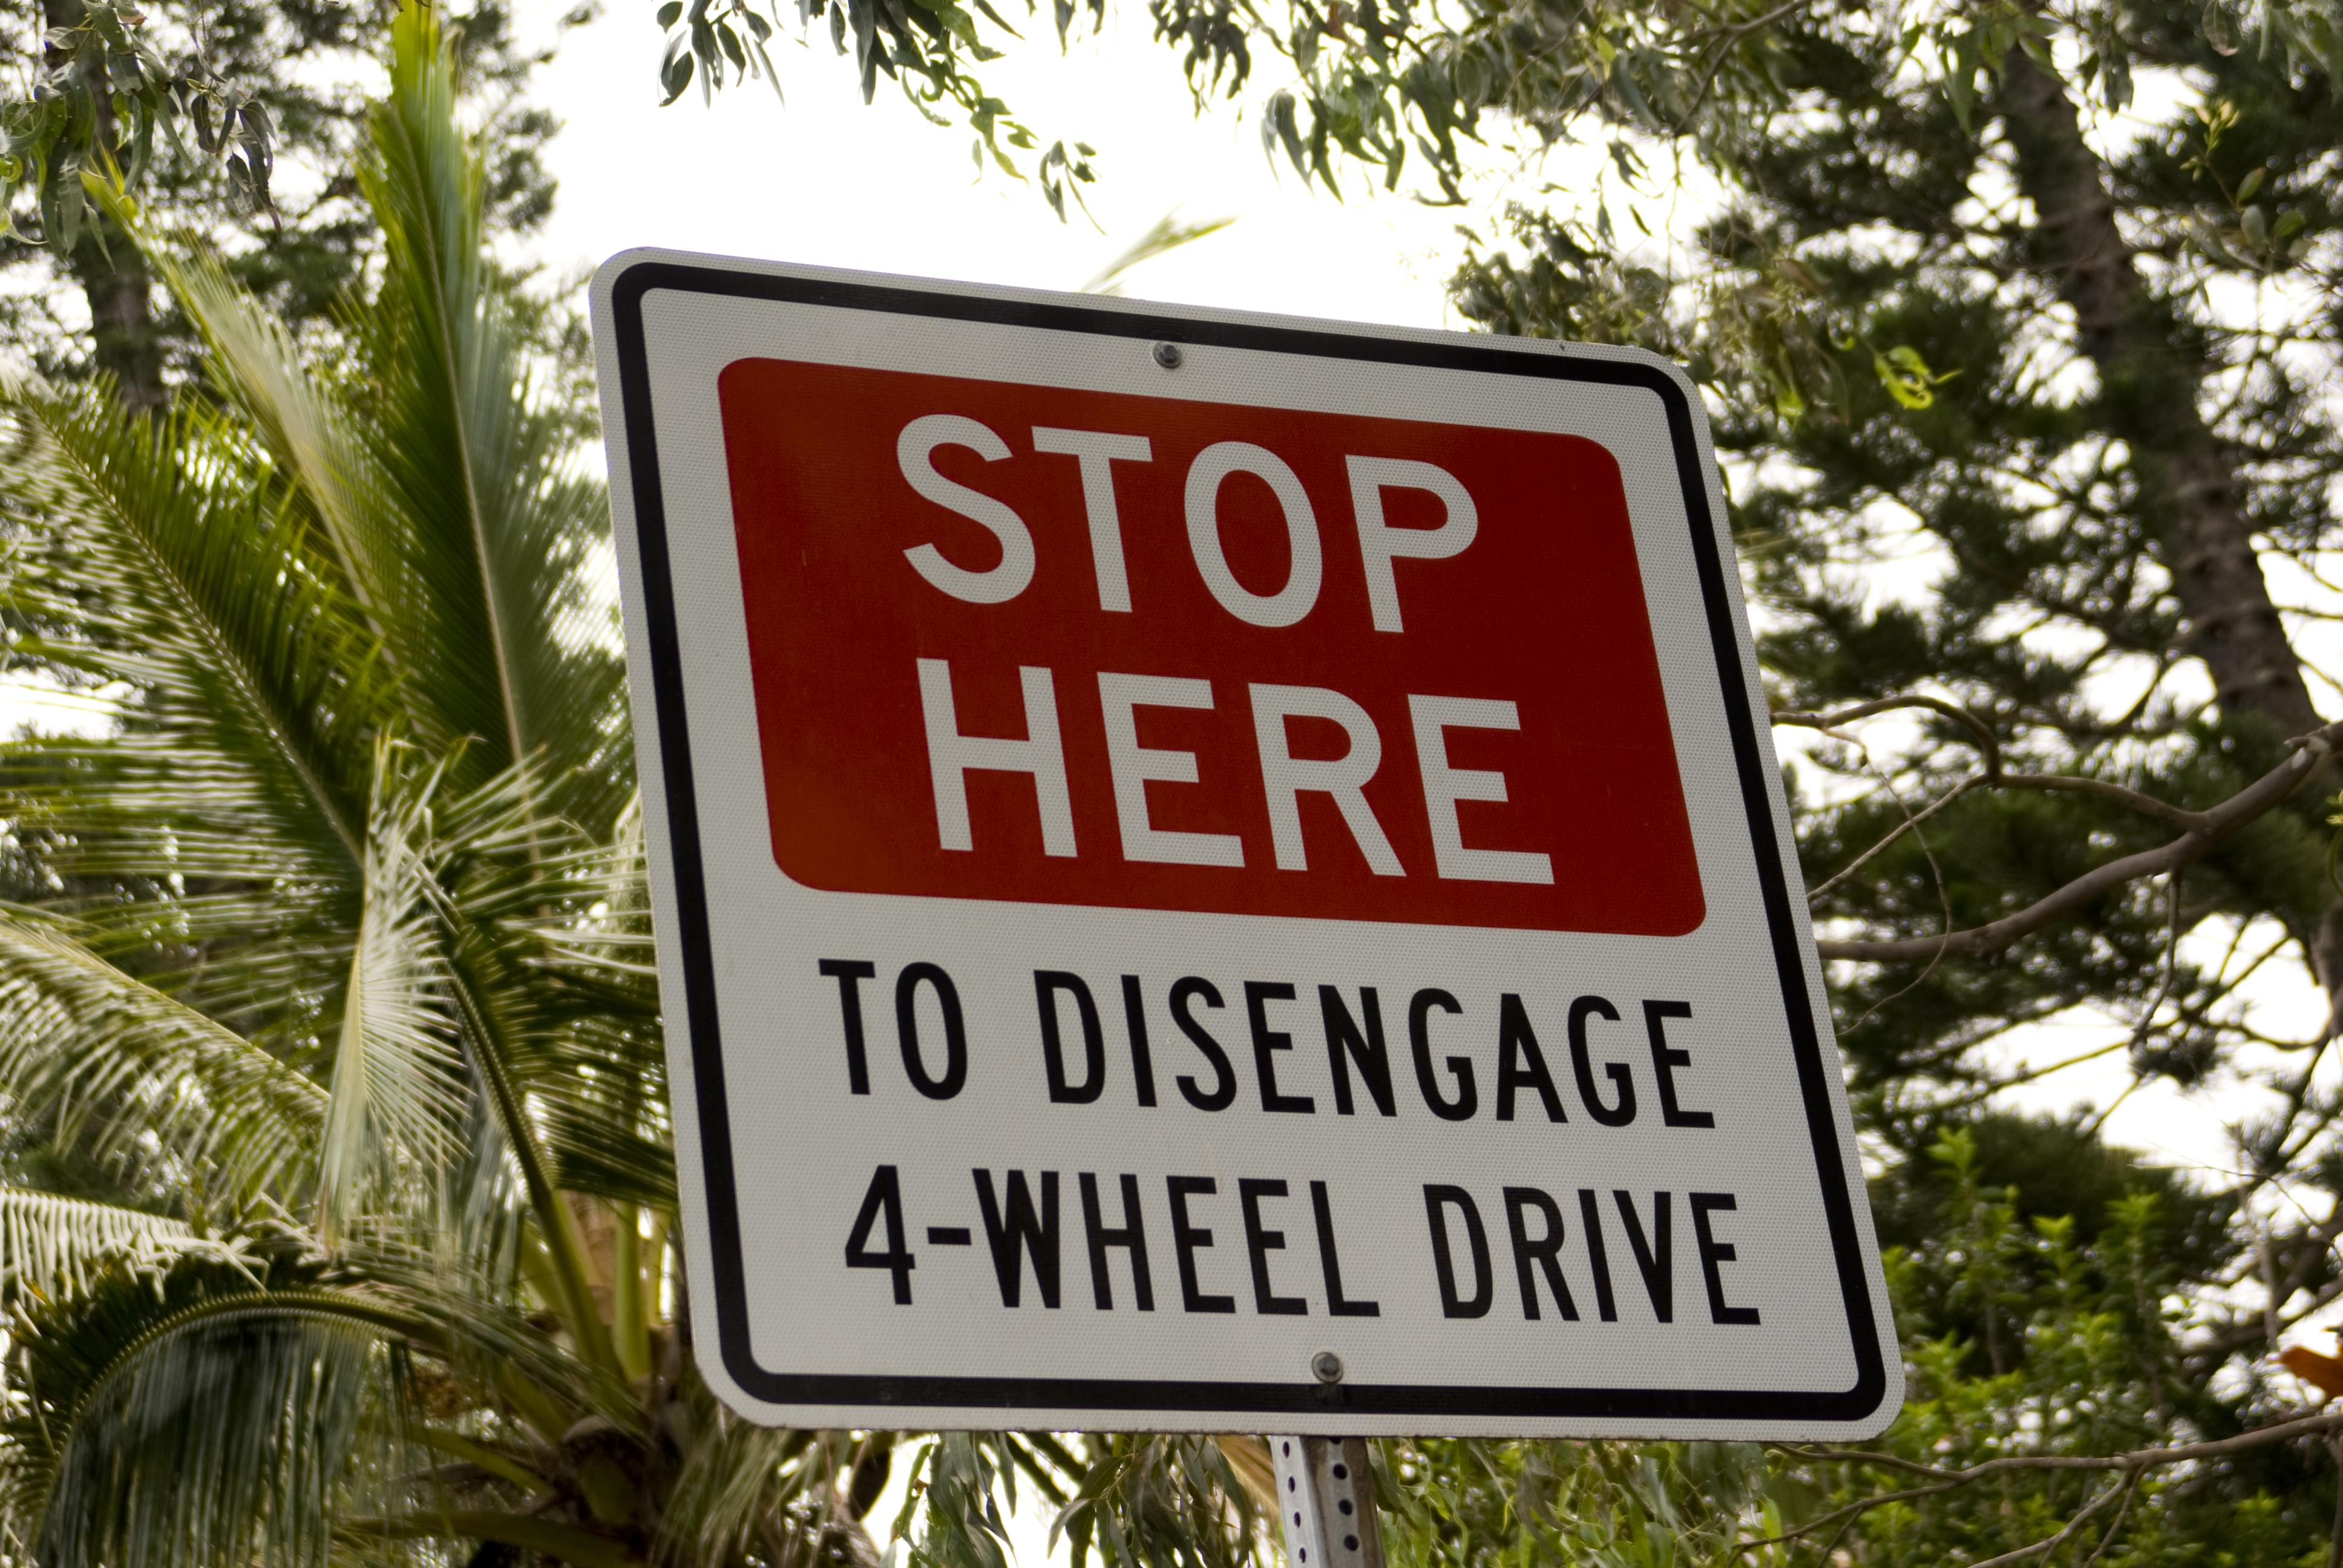 A road sign saying to stop here to disengage 4-wheel drive